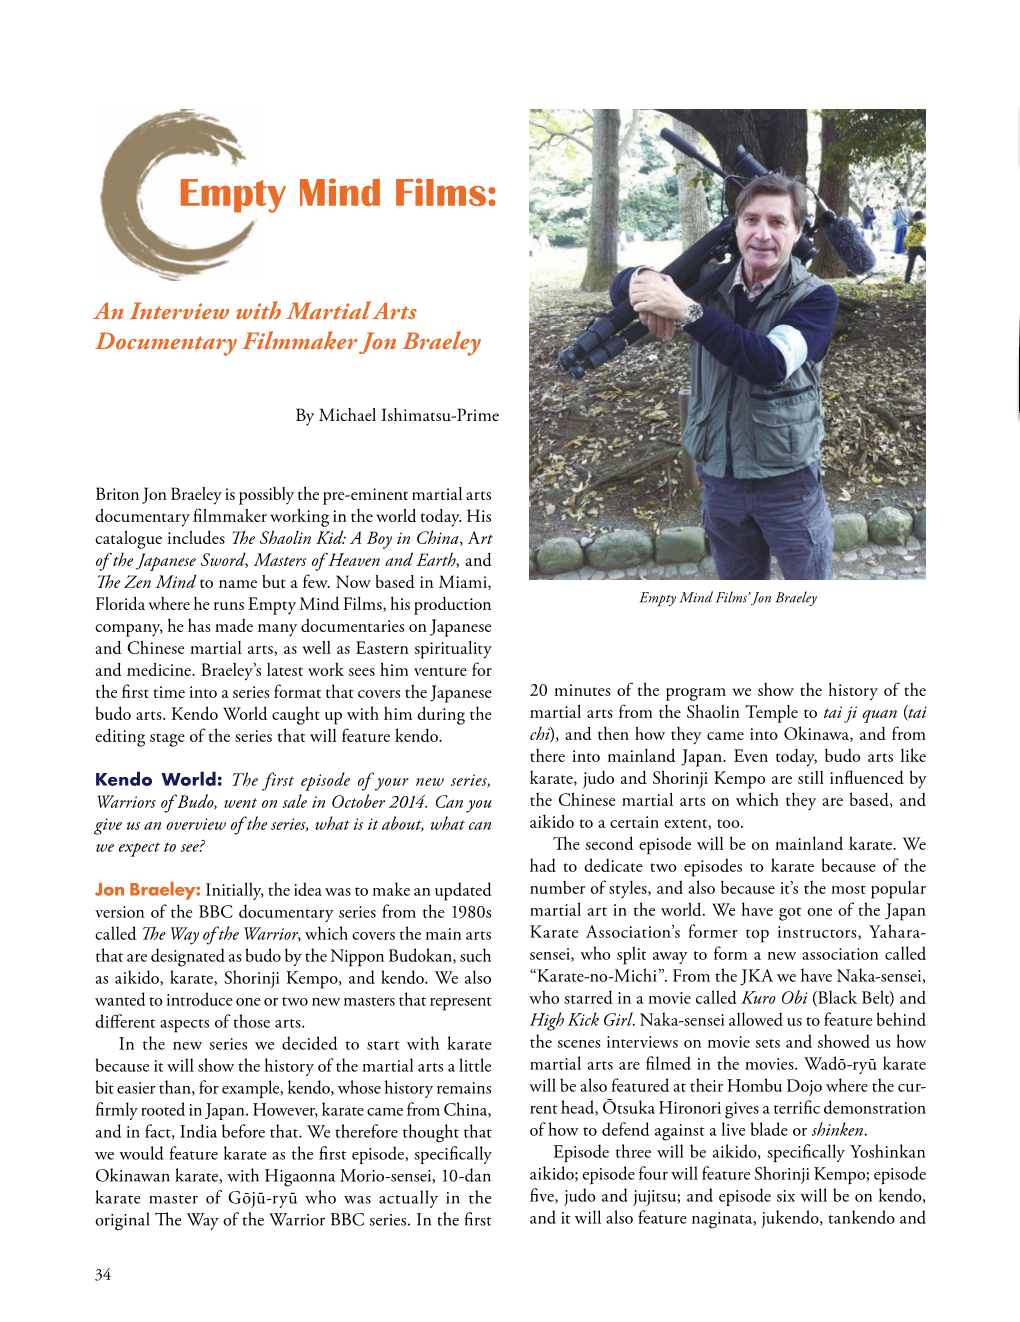 Empty Mind Films: an Interview with Martial Arts Documentary